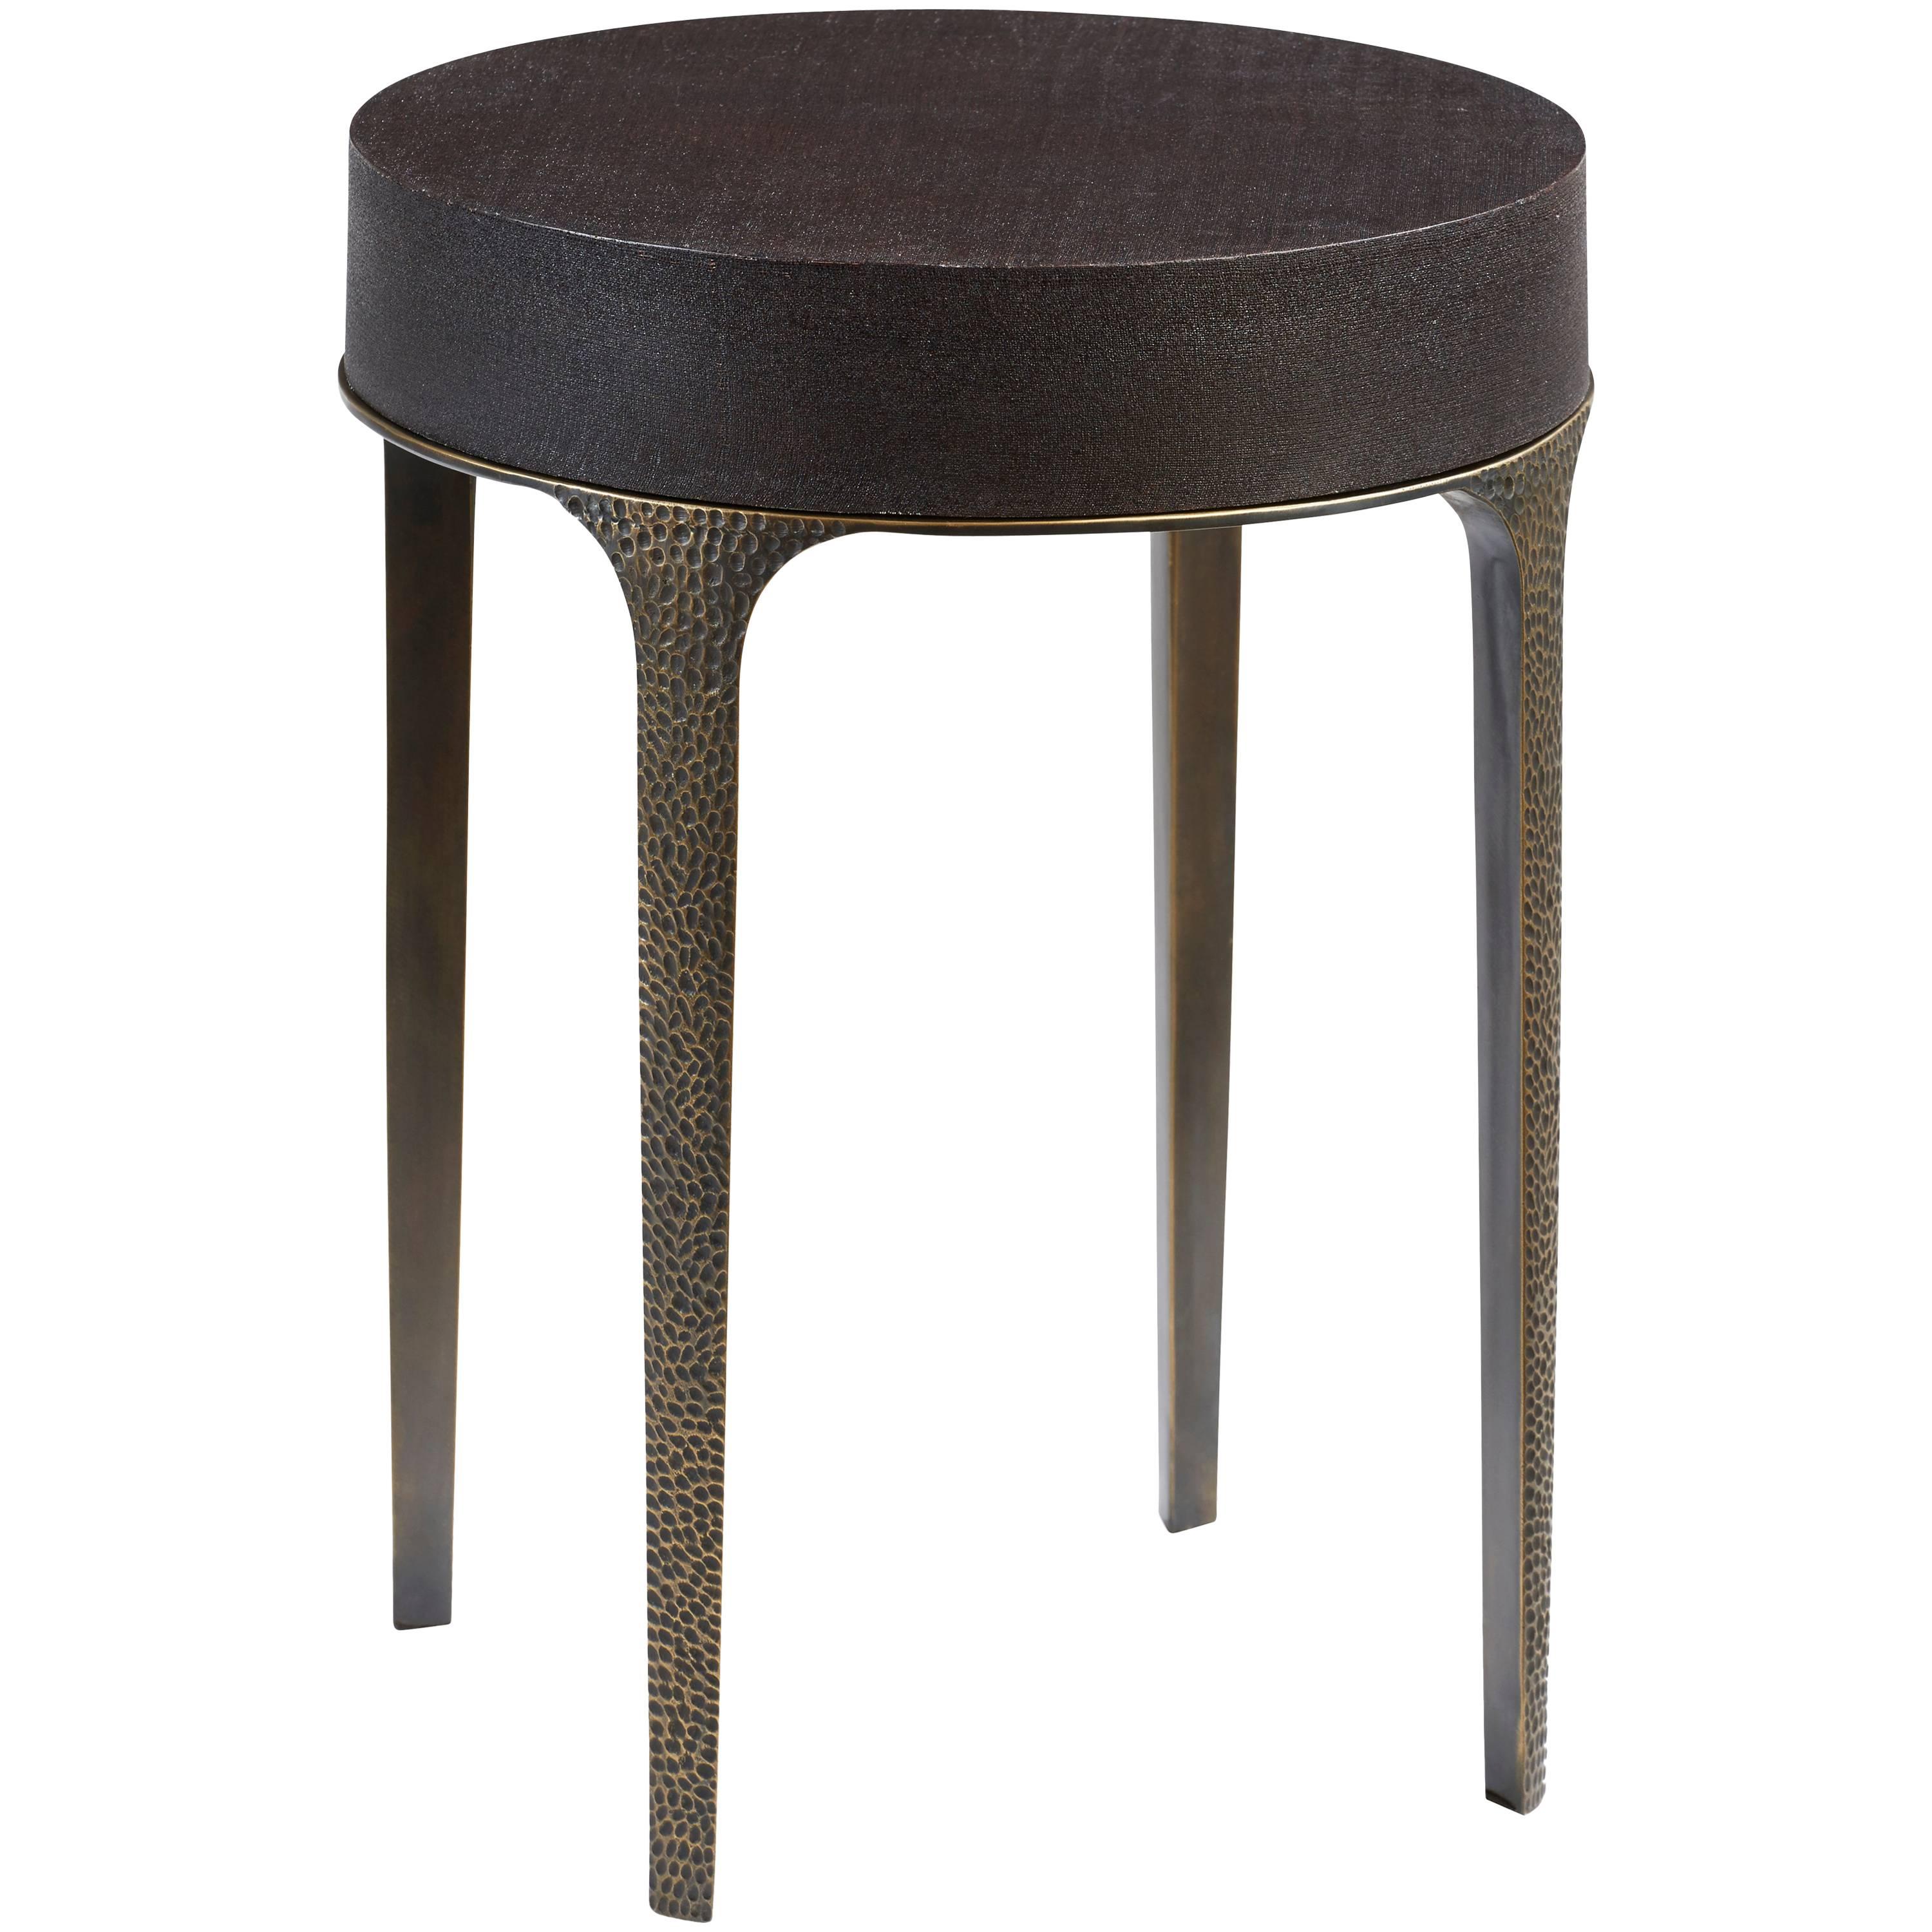 Side Table, LADY BUG by Reda Amalou Design, 2017, Legs in Hammered bronze 